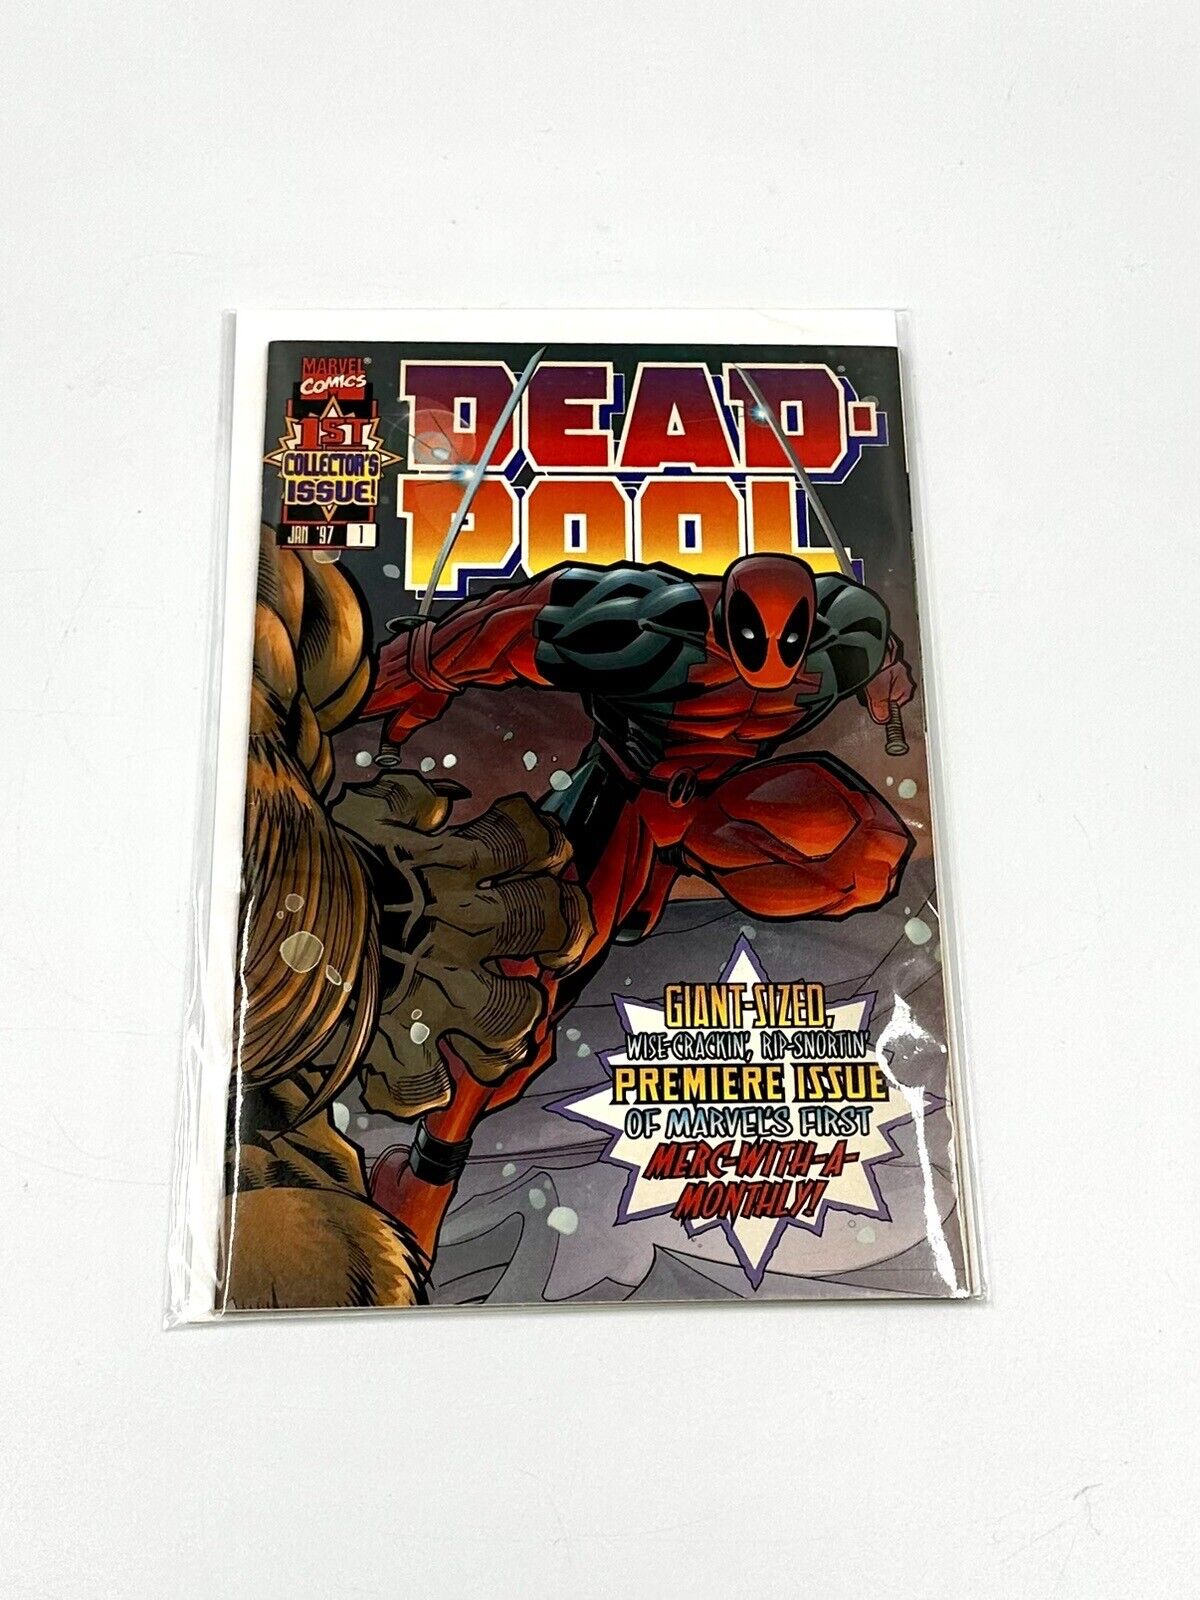 Vintage Deadpool Collector’s Issue Vol. 1 No. 1 January 1997 -Blind Al-FAST SHIP